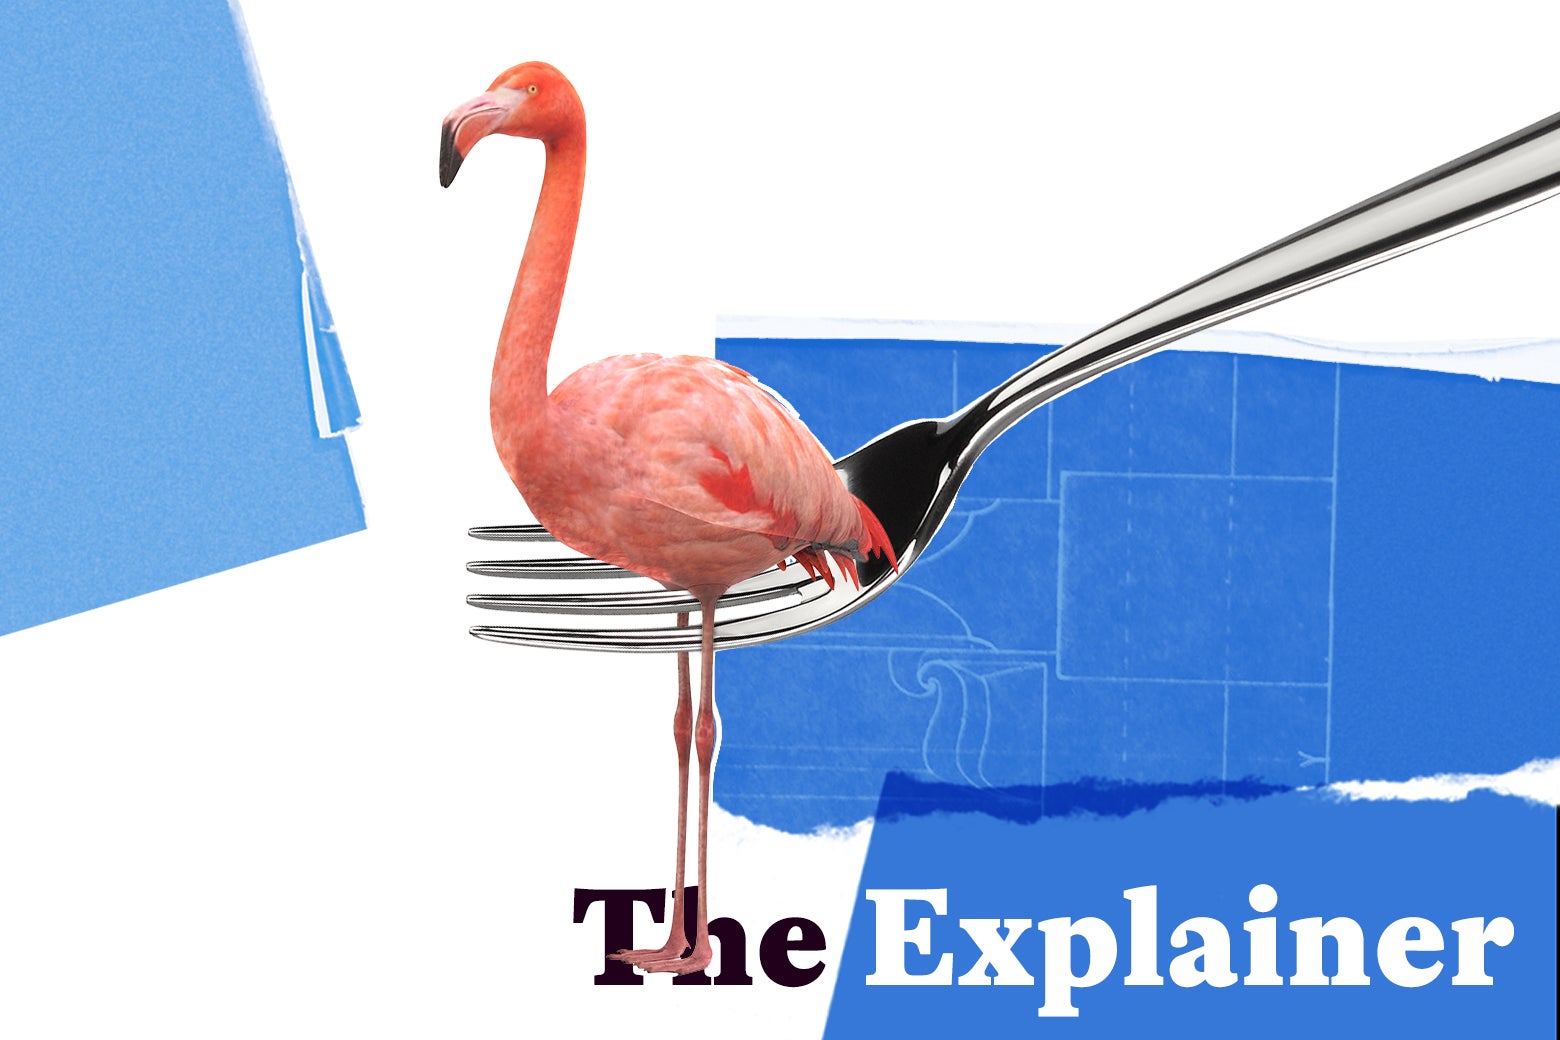 A flamingo caught in a fork, looking supposedly delectable